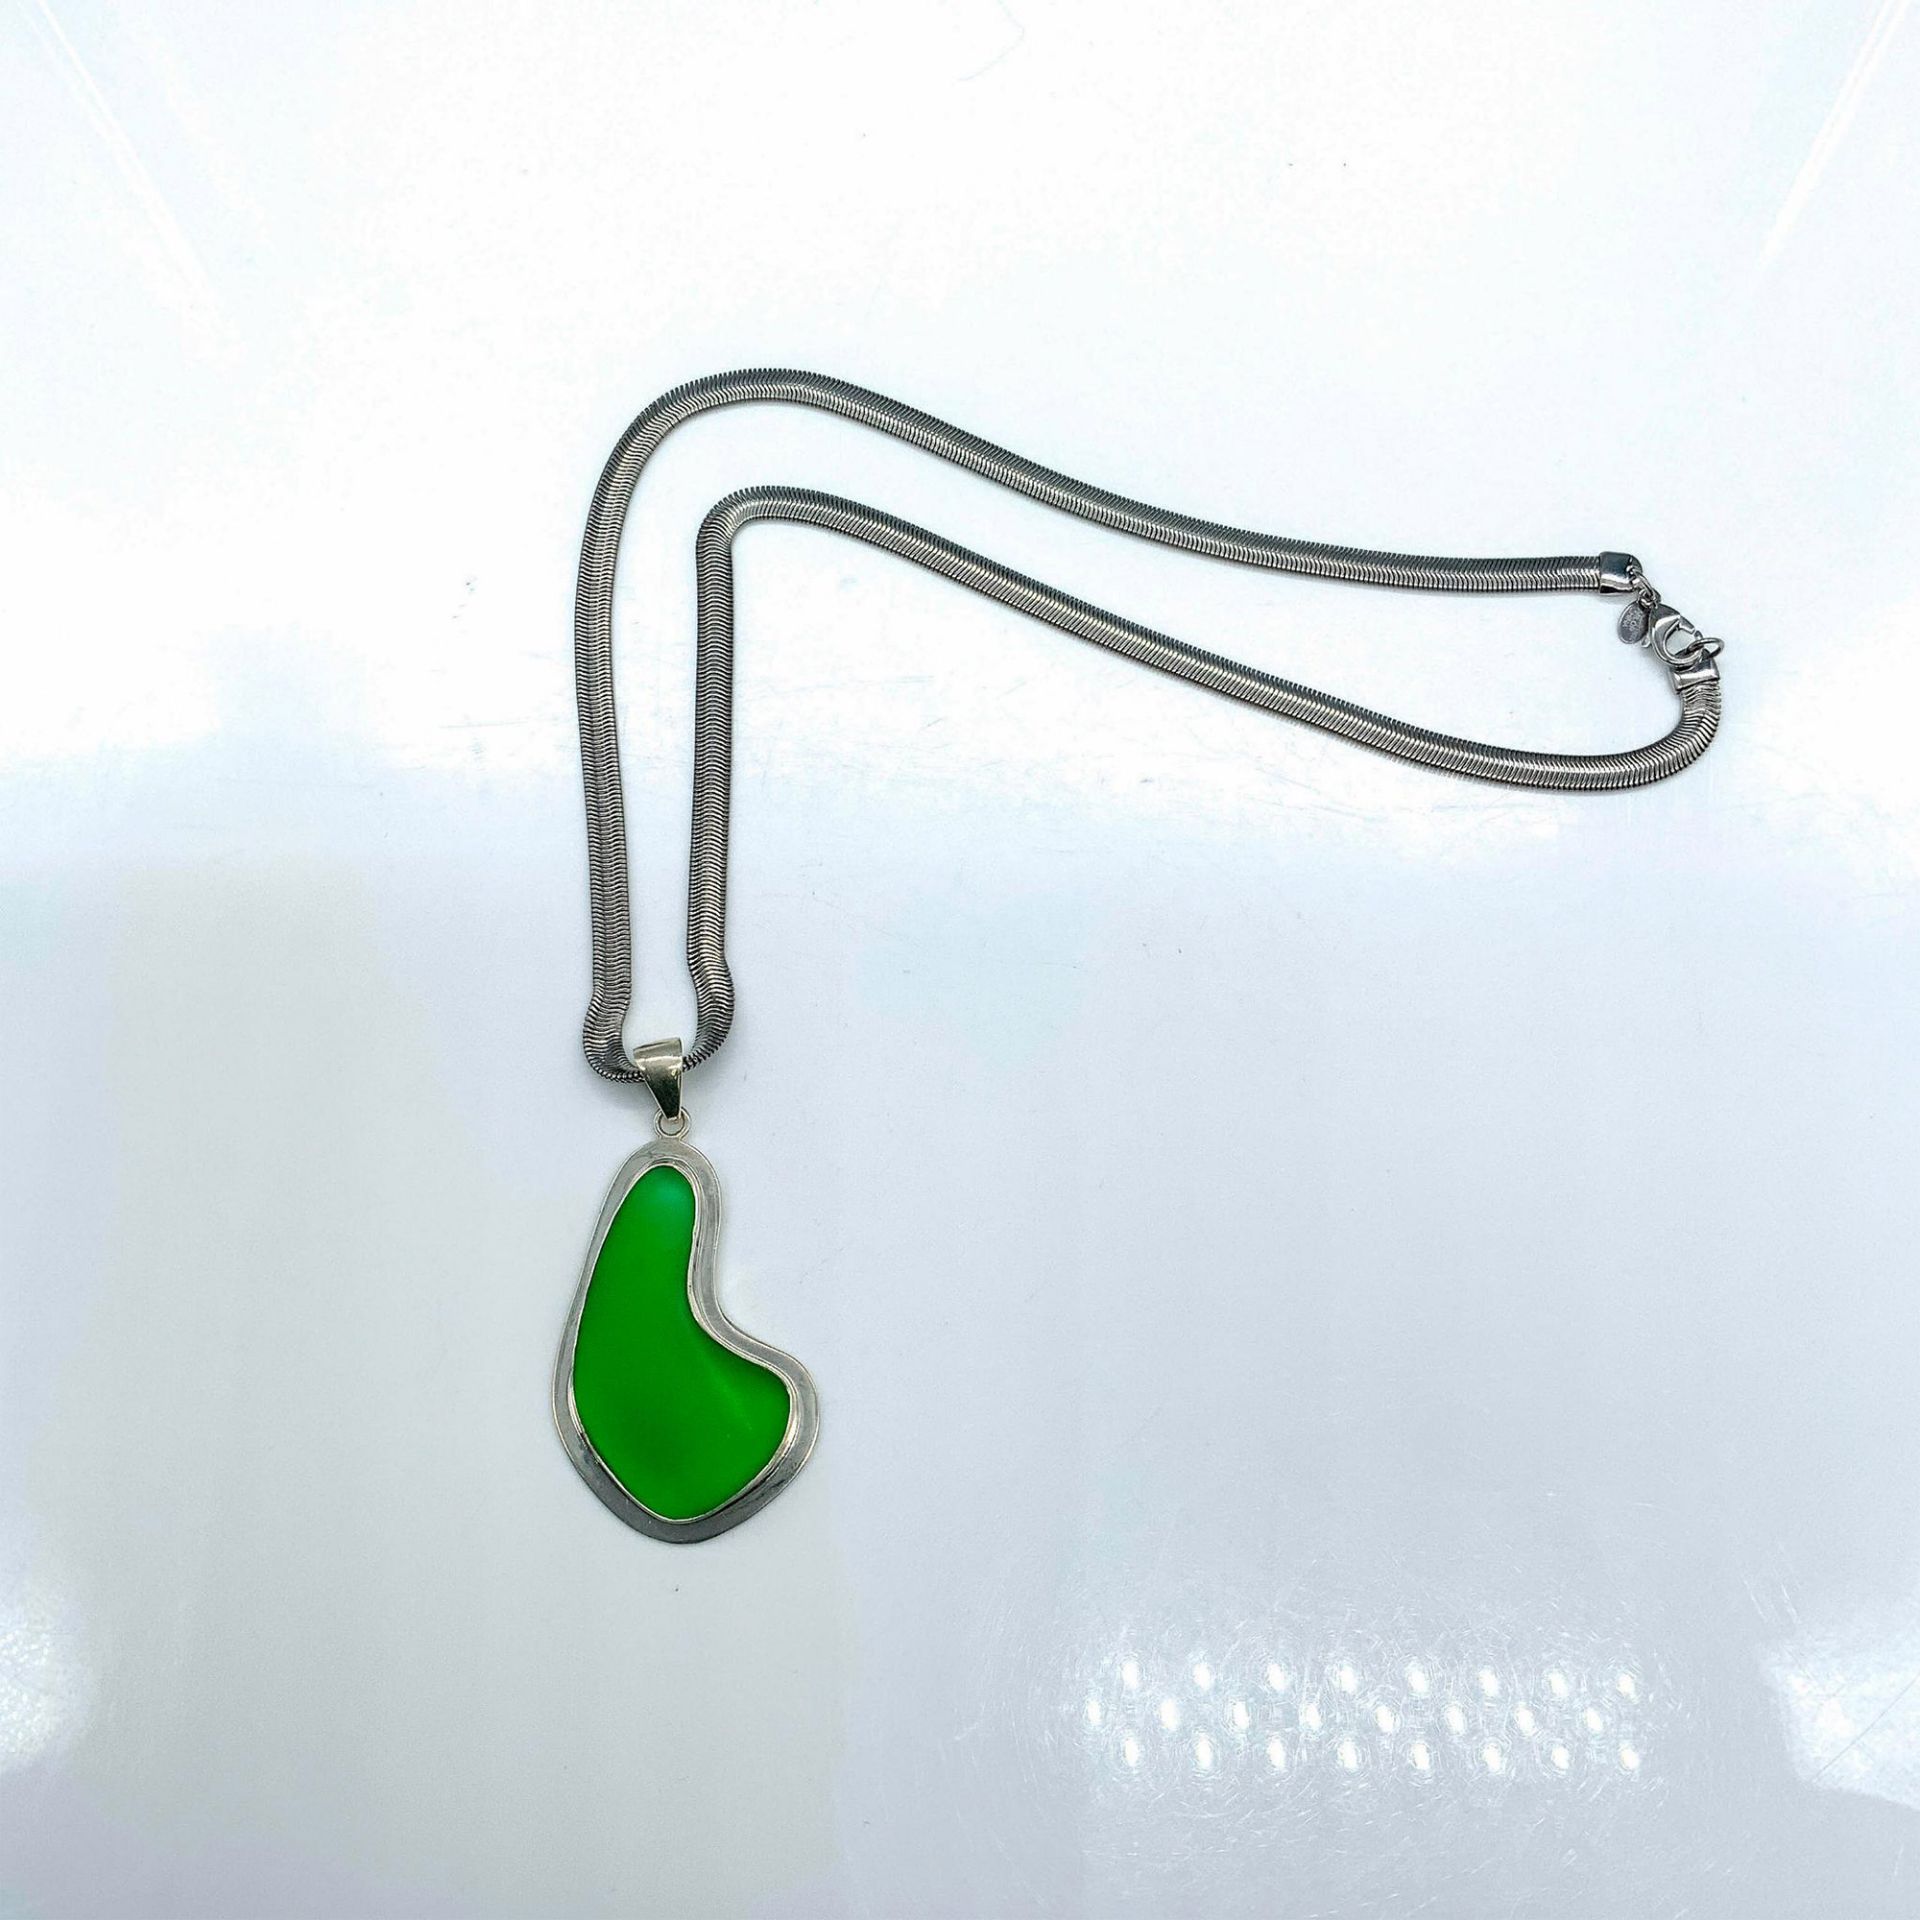 Charles Albert Green Sea Glass Pendant and Italian Milor Steel Chain Necklace - Image 2 of 3